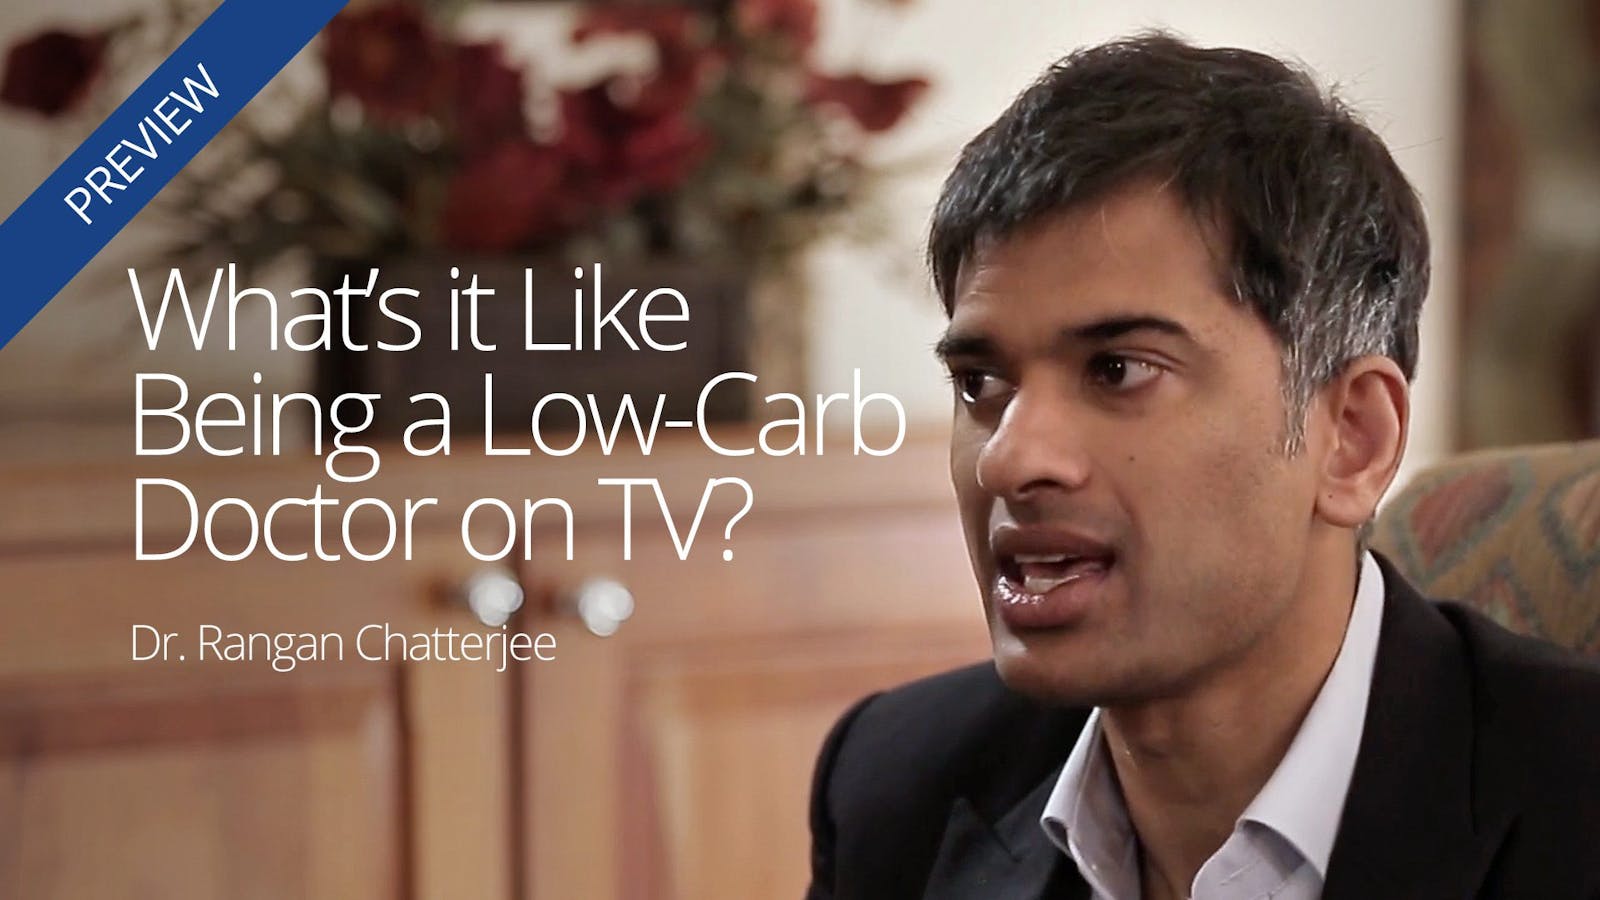 What's it like being a low-carb doctor on TV? - Diet Doctor1600 x 900